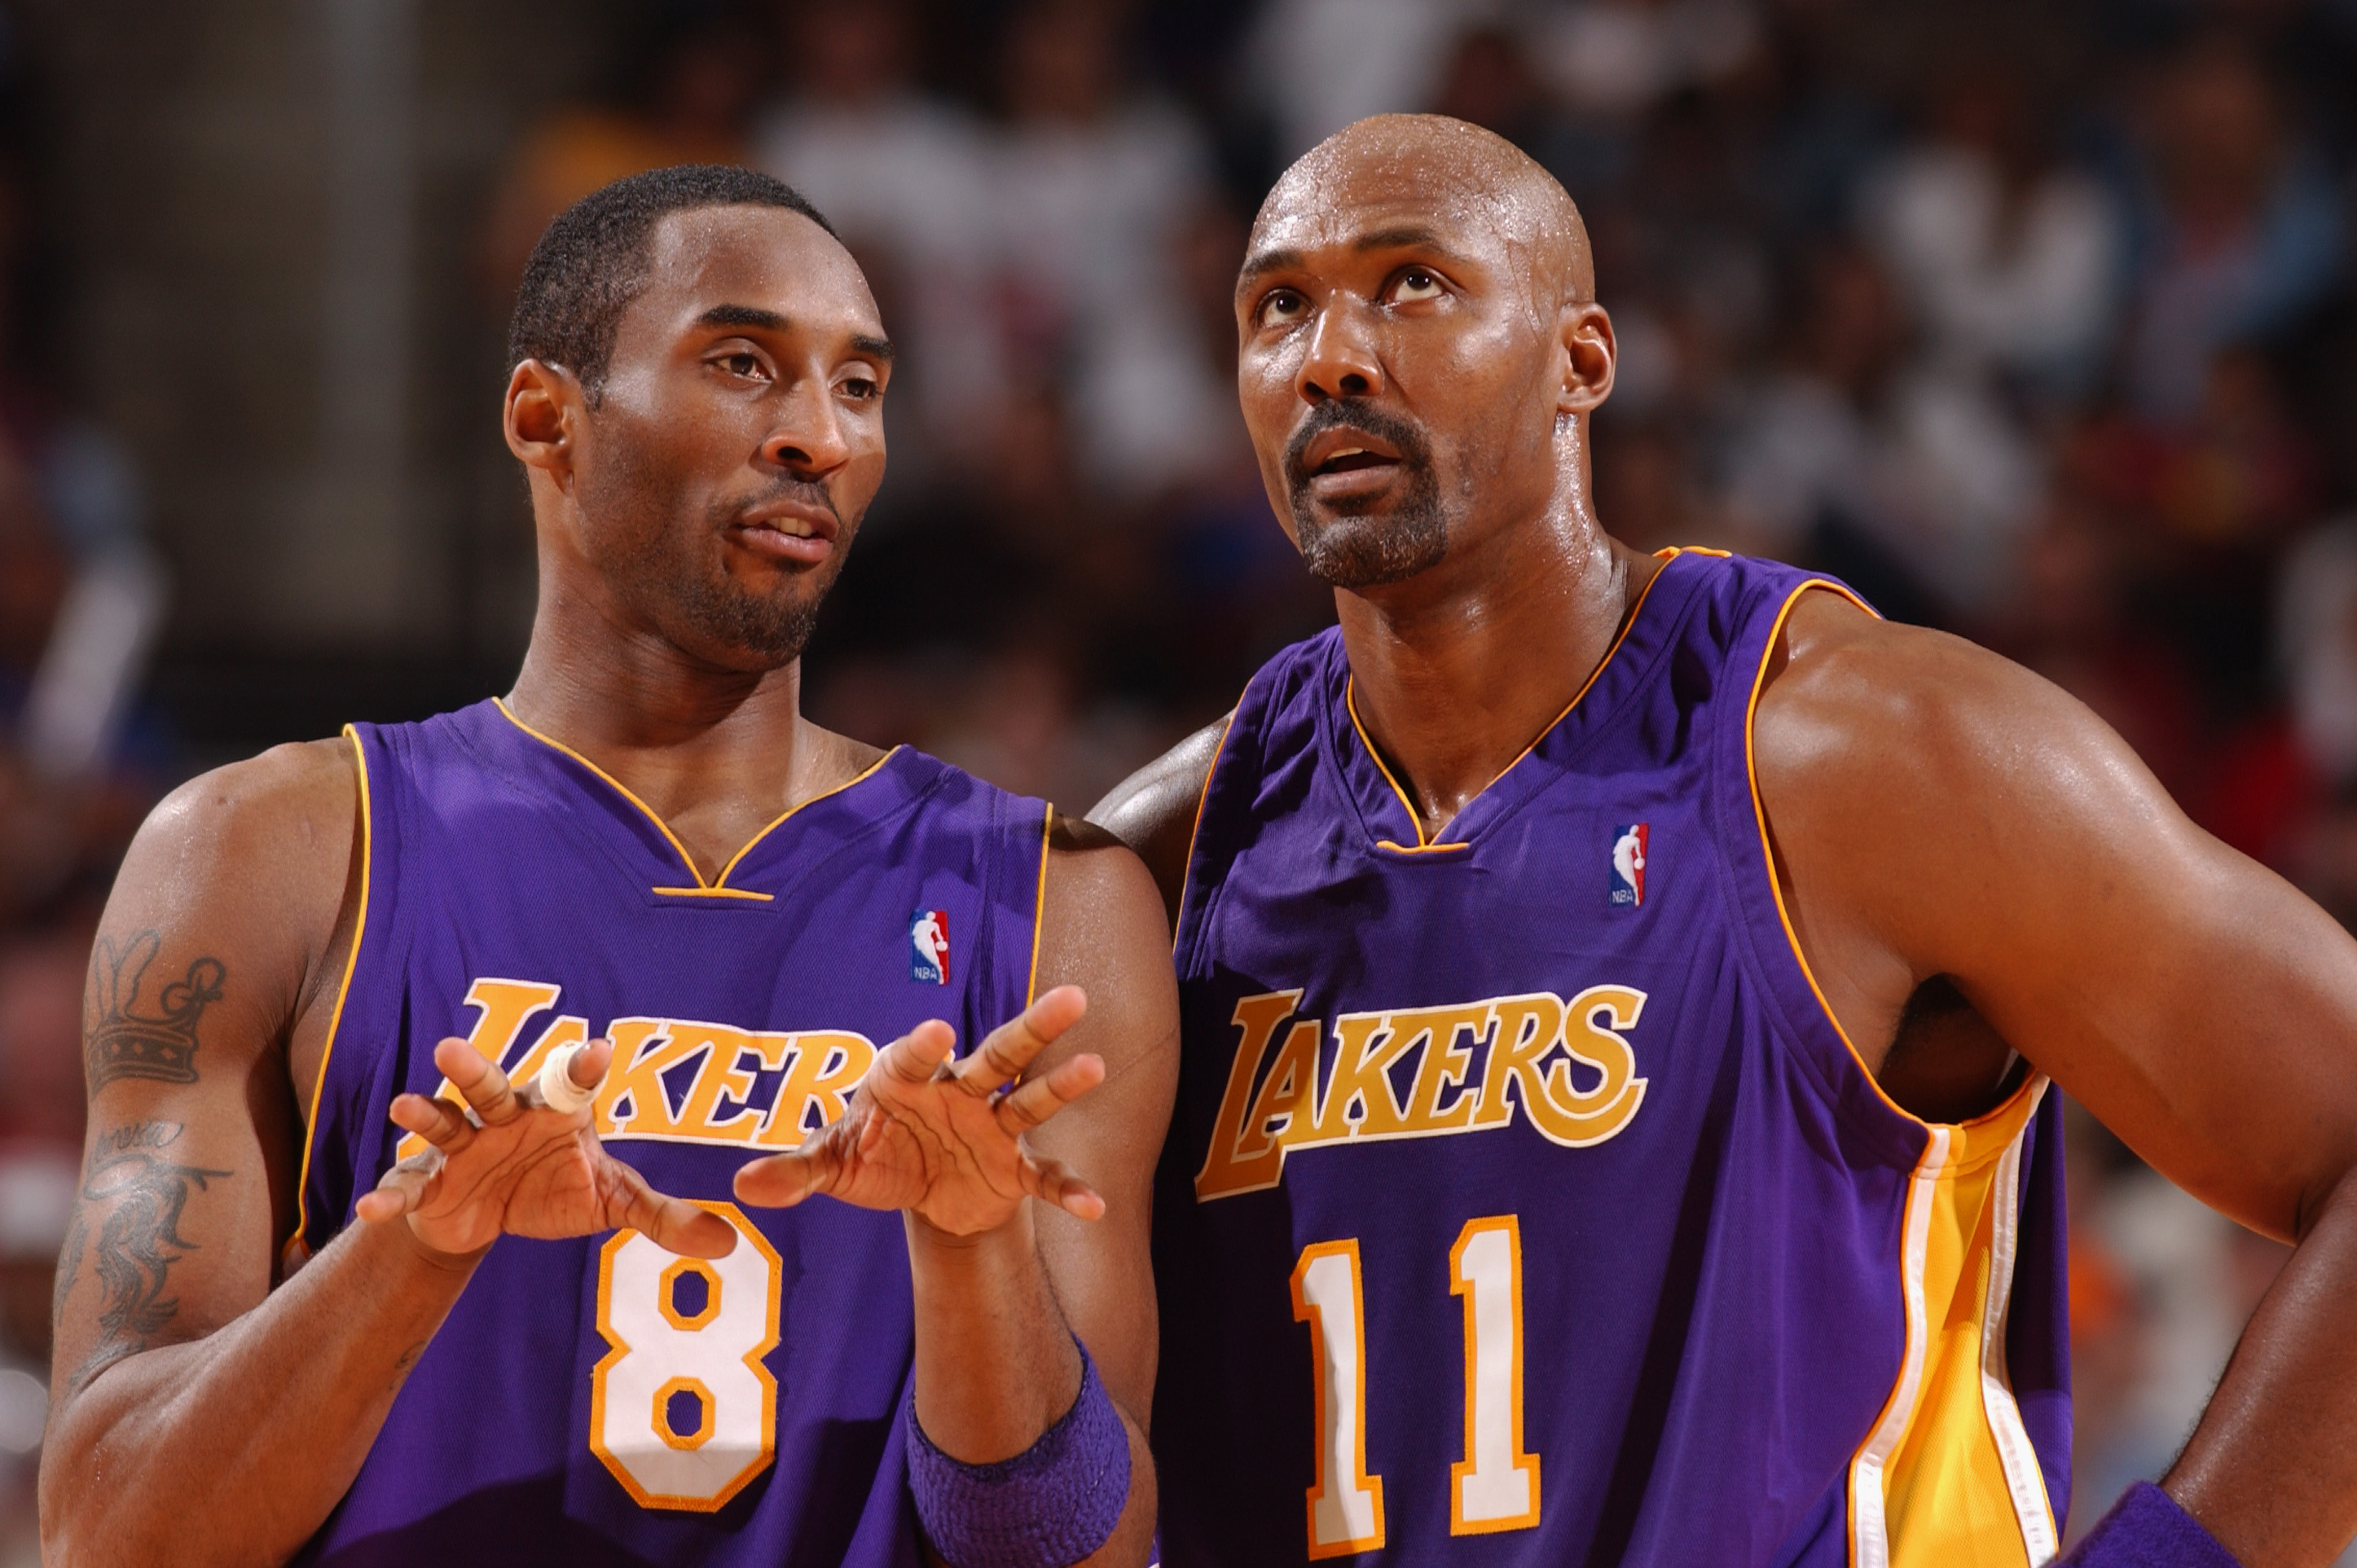 Karl Malone Gives Kobe Bryant Standing Offer to Fight Him ...